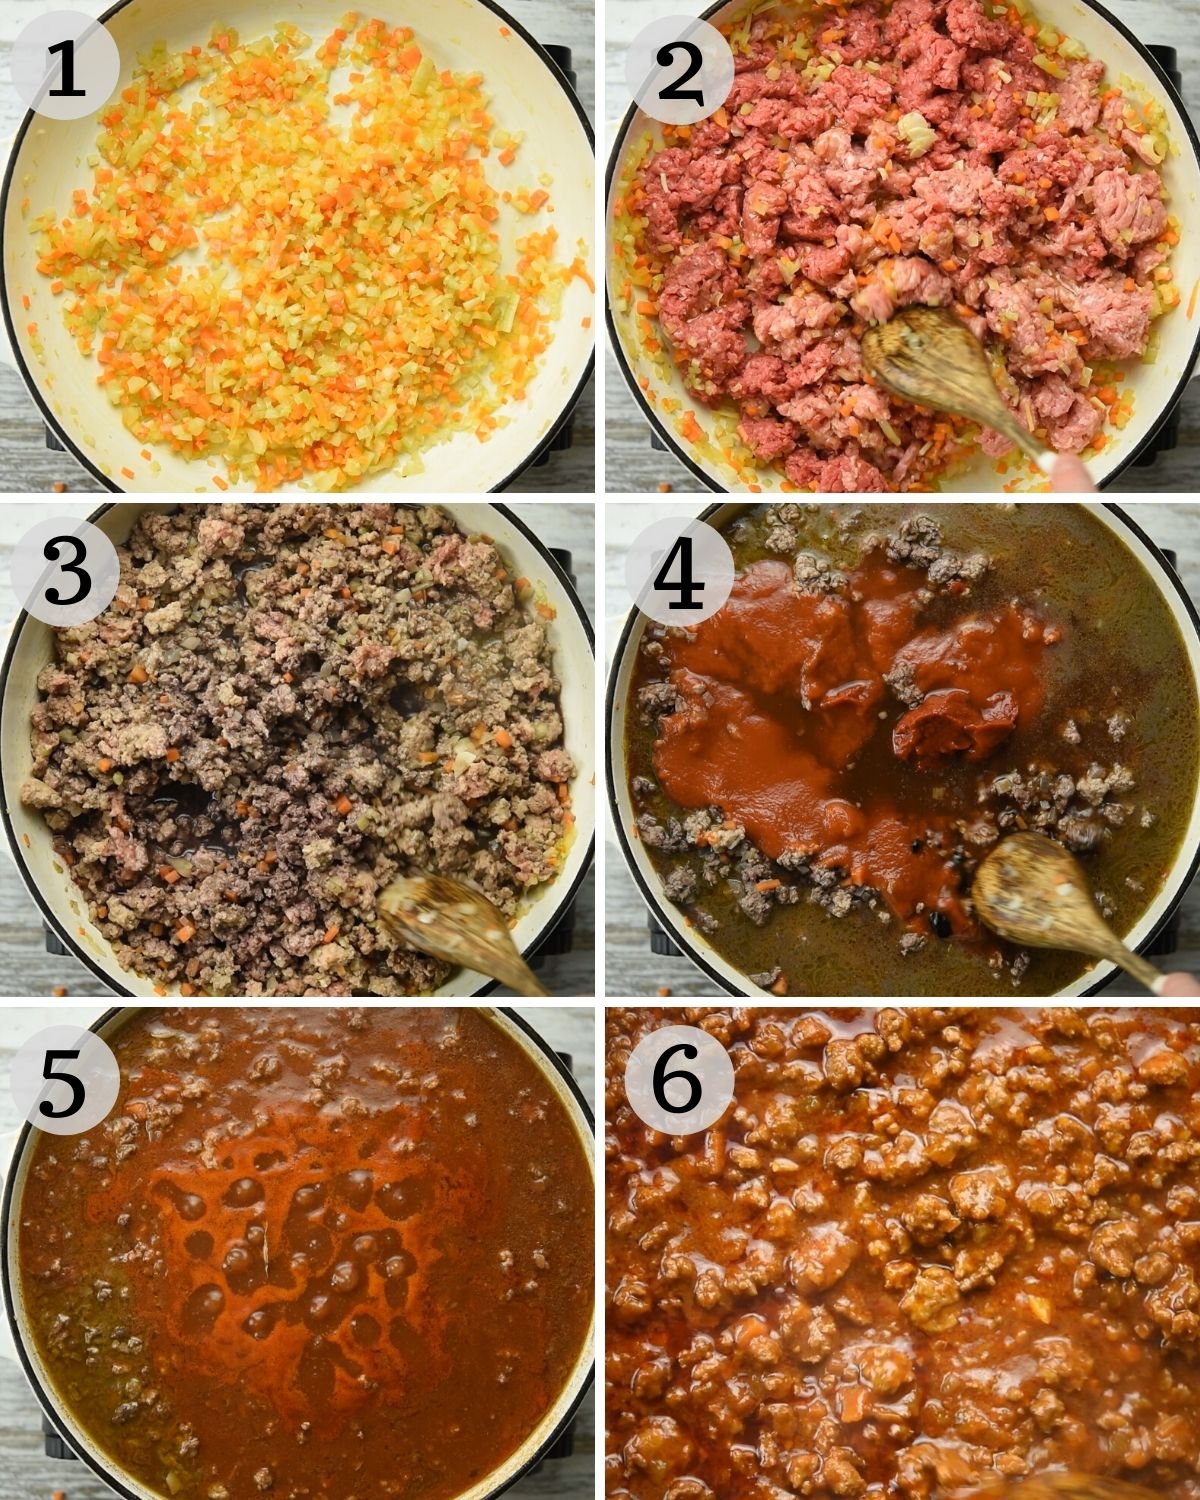 Step by step photos for making beef ragu